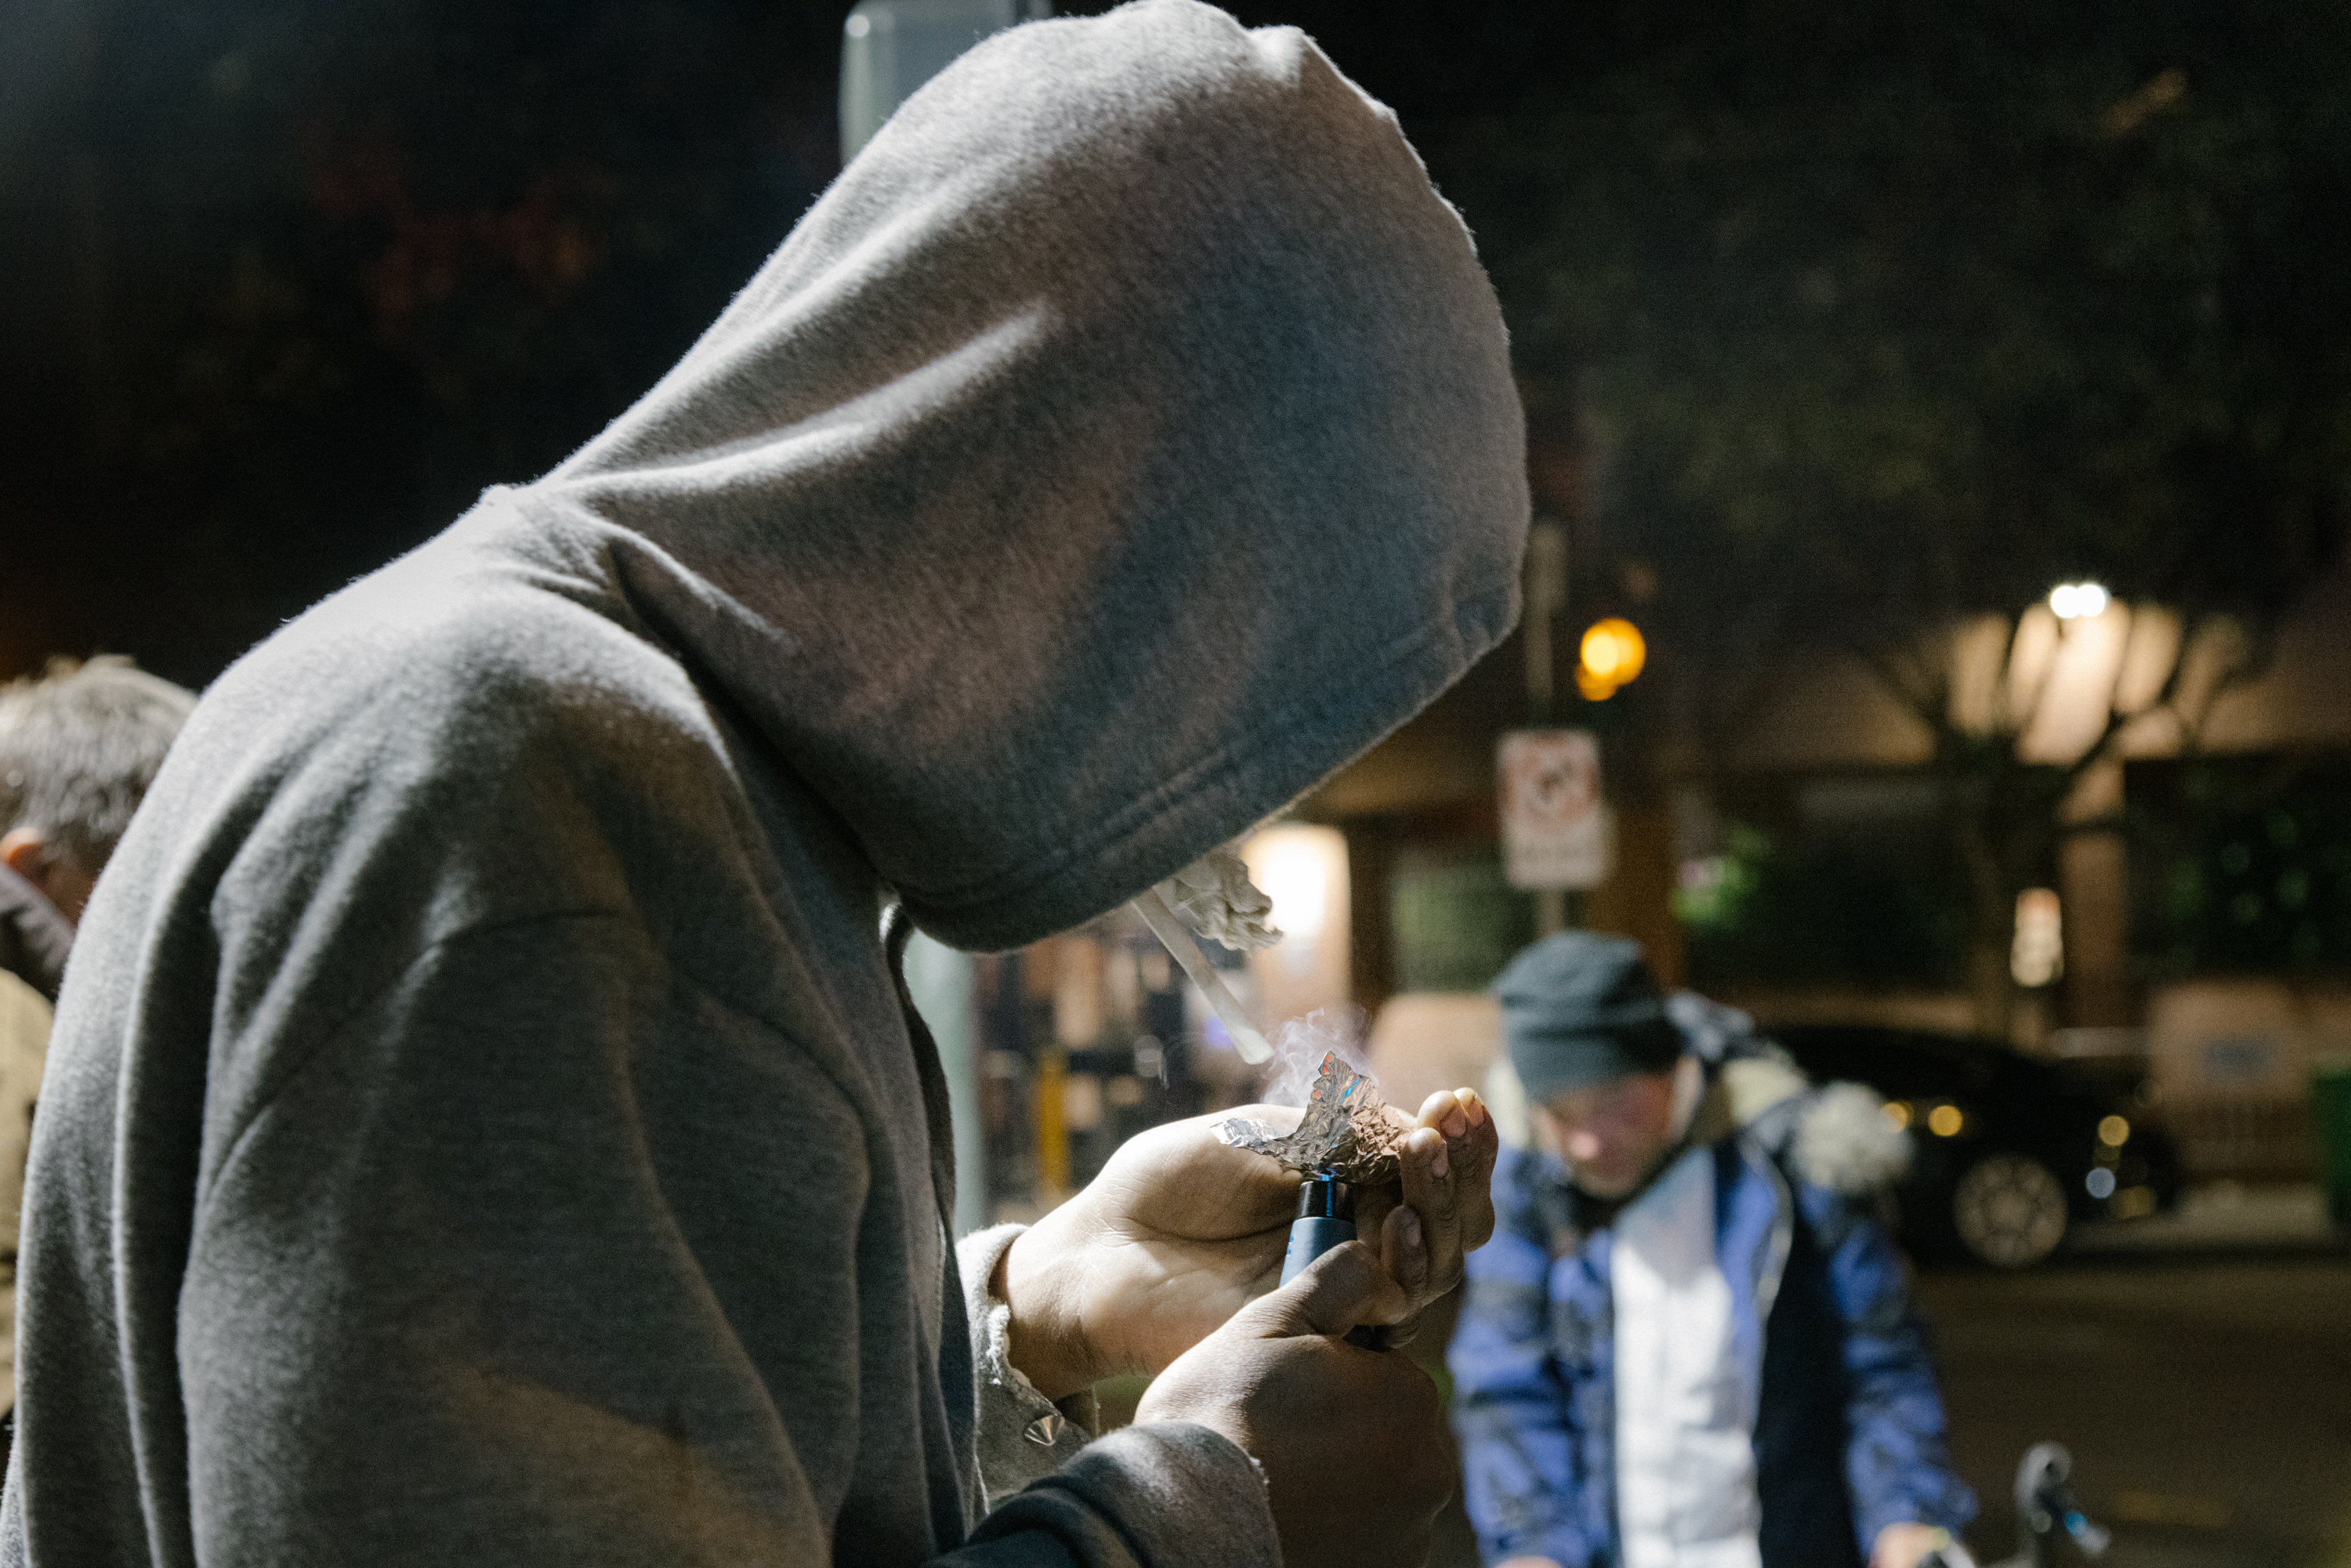 A person in a hood lighting a pipe, another blurred figure in background, nighttime urban setting.